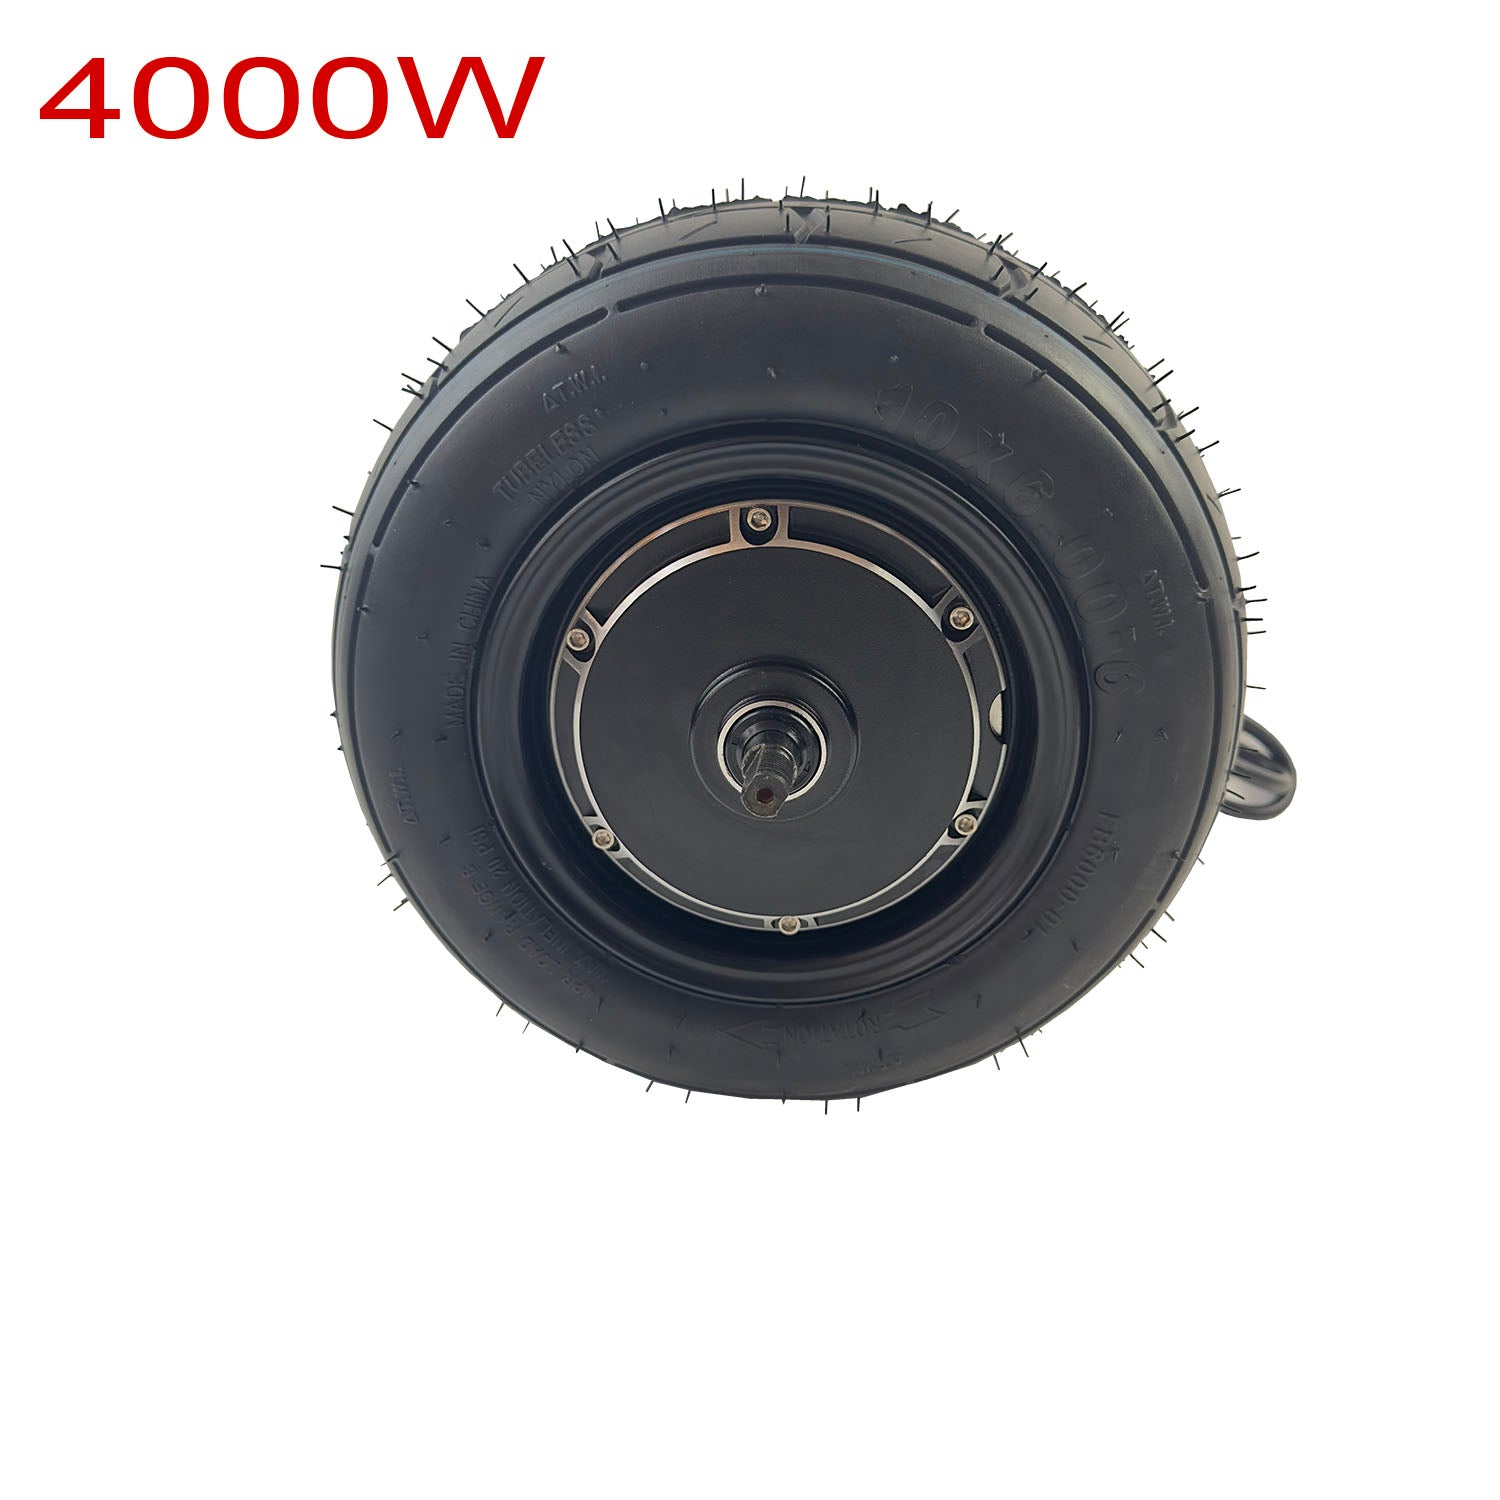 10 inch 10x6-5.5 wide tyre hubmotor 600W and 4000W option for diy one wheel